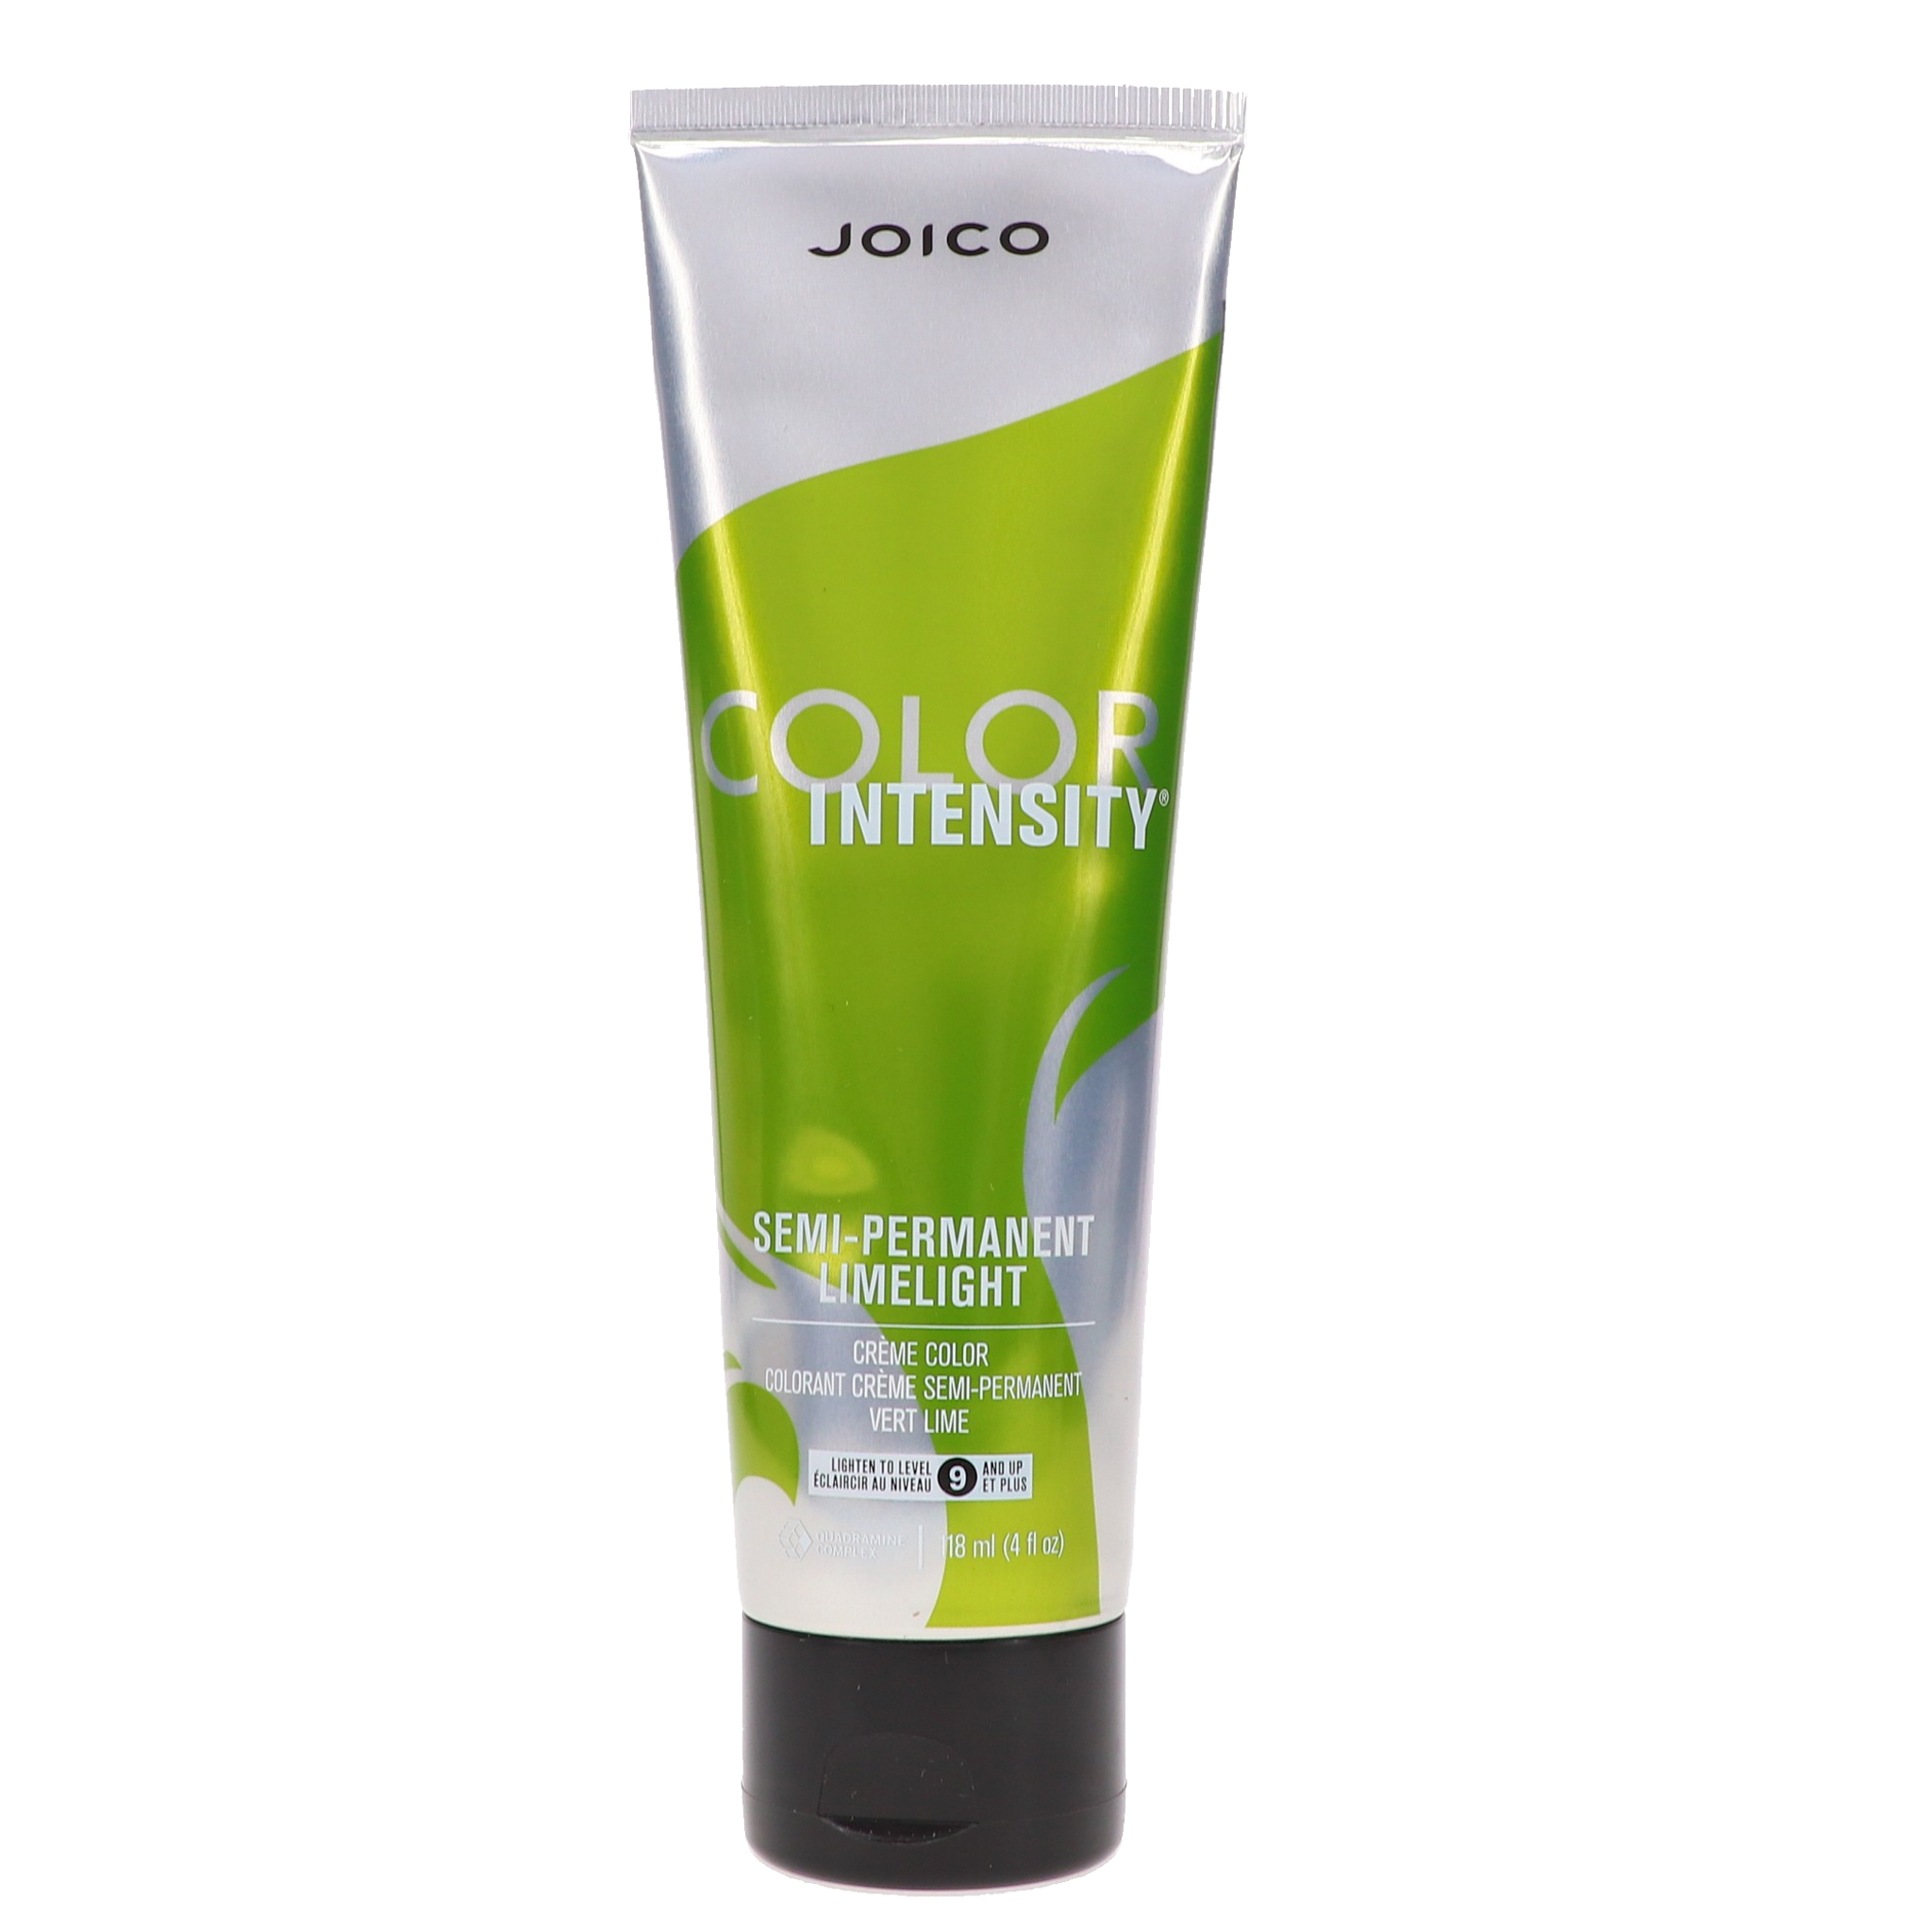 Joico Color Intensity Semi Permanent Shade Limelight 4 oz - image 1 of 8